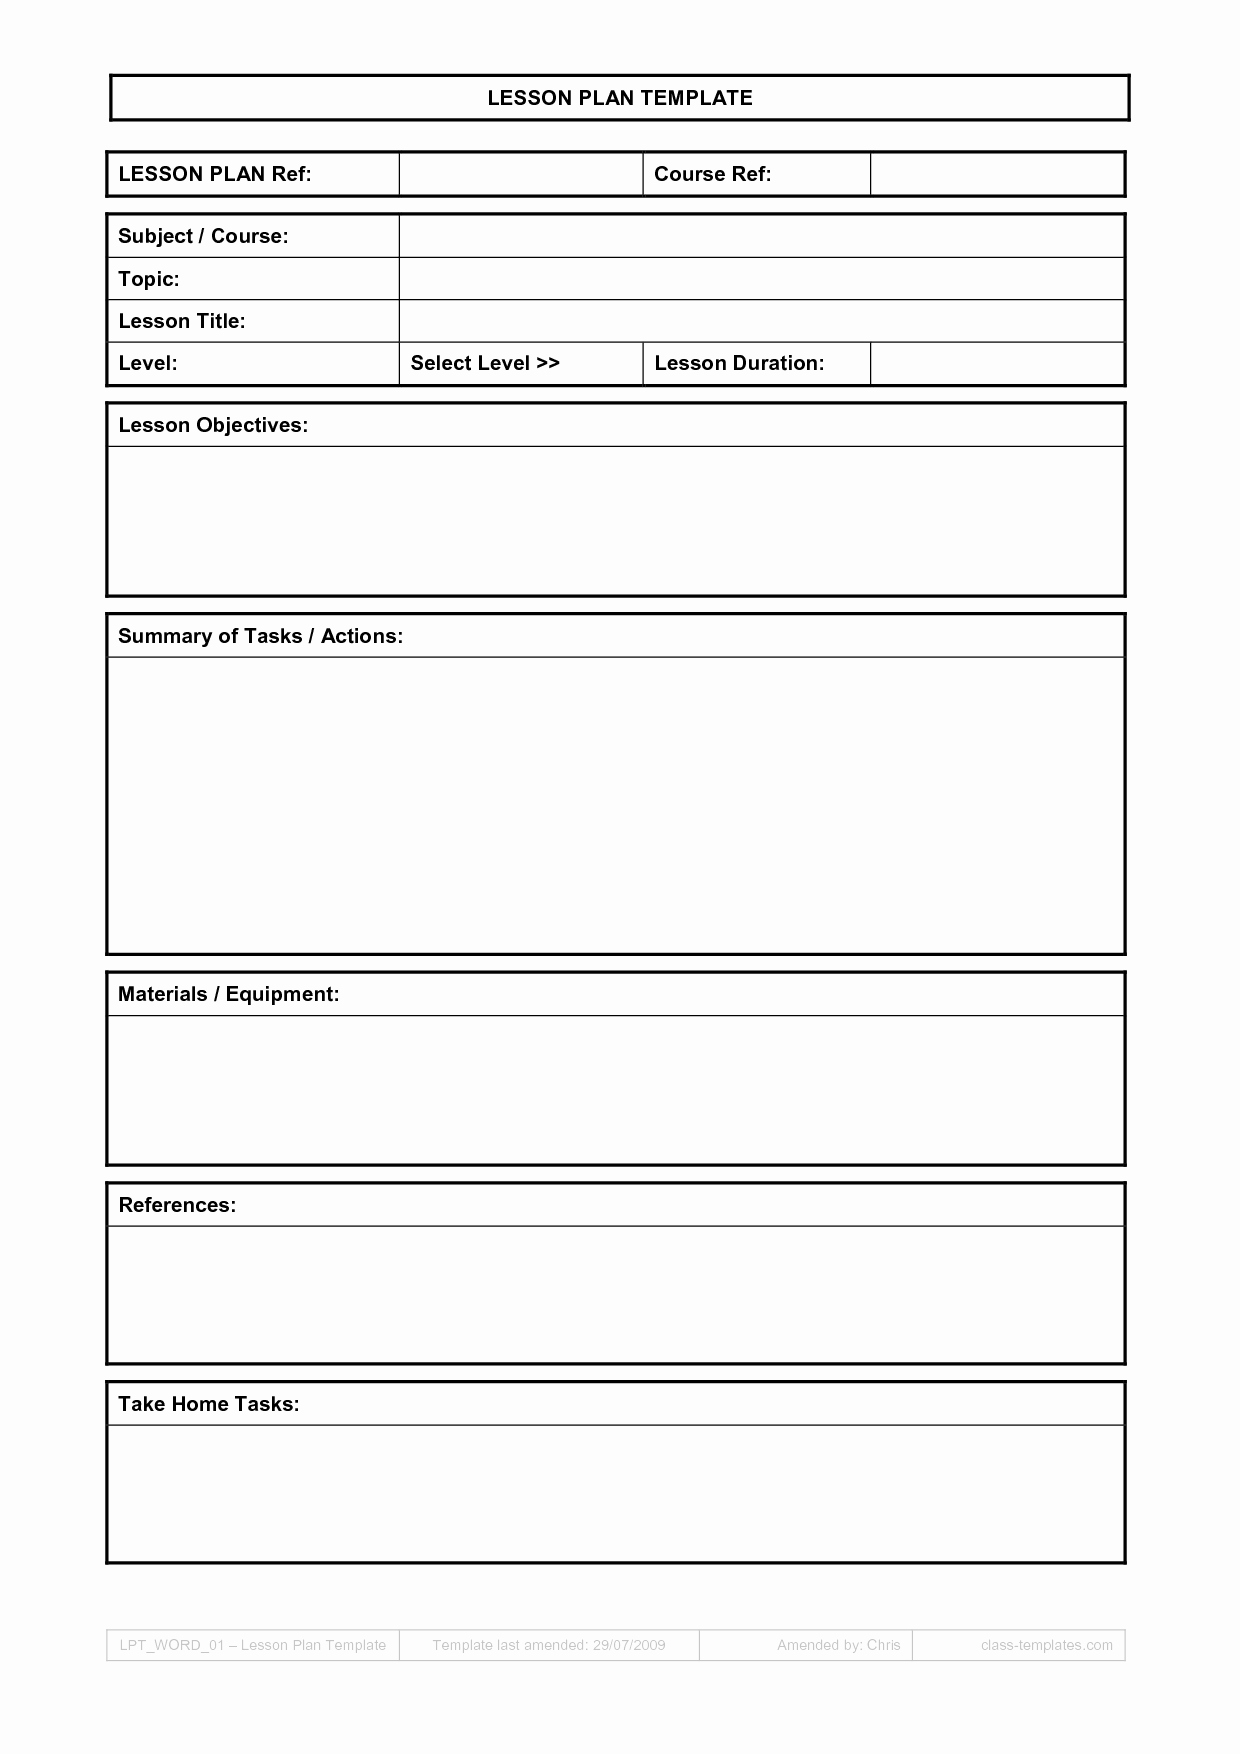 Sample Lesson Plan Template Unique Lesson Plan Template Free Pic Twiroo